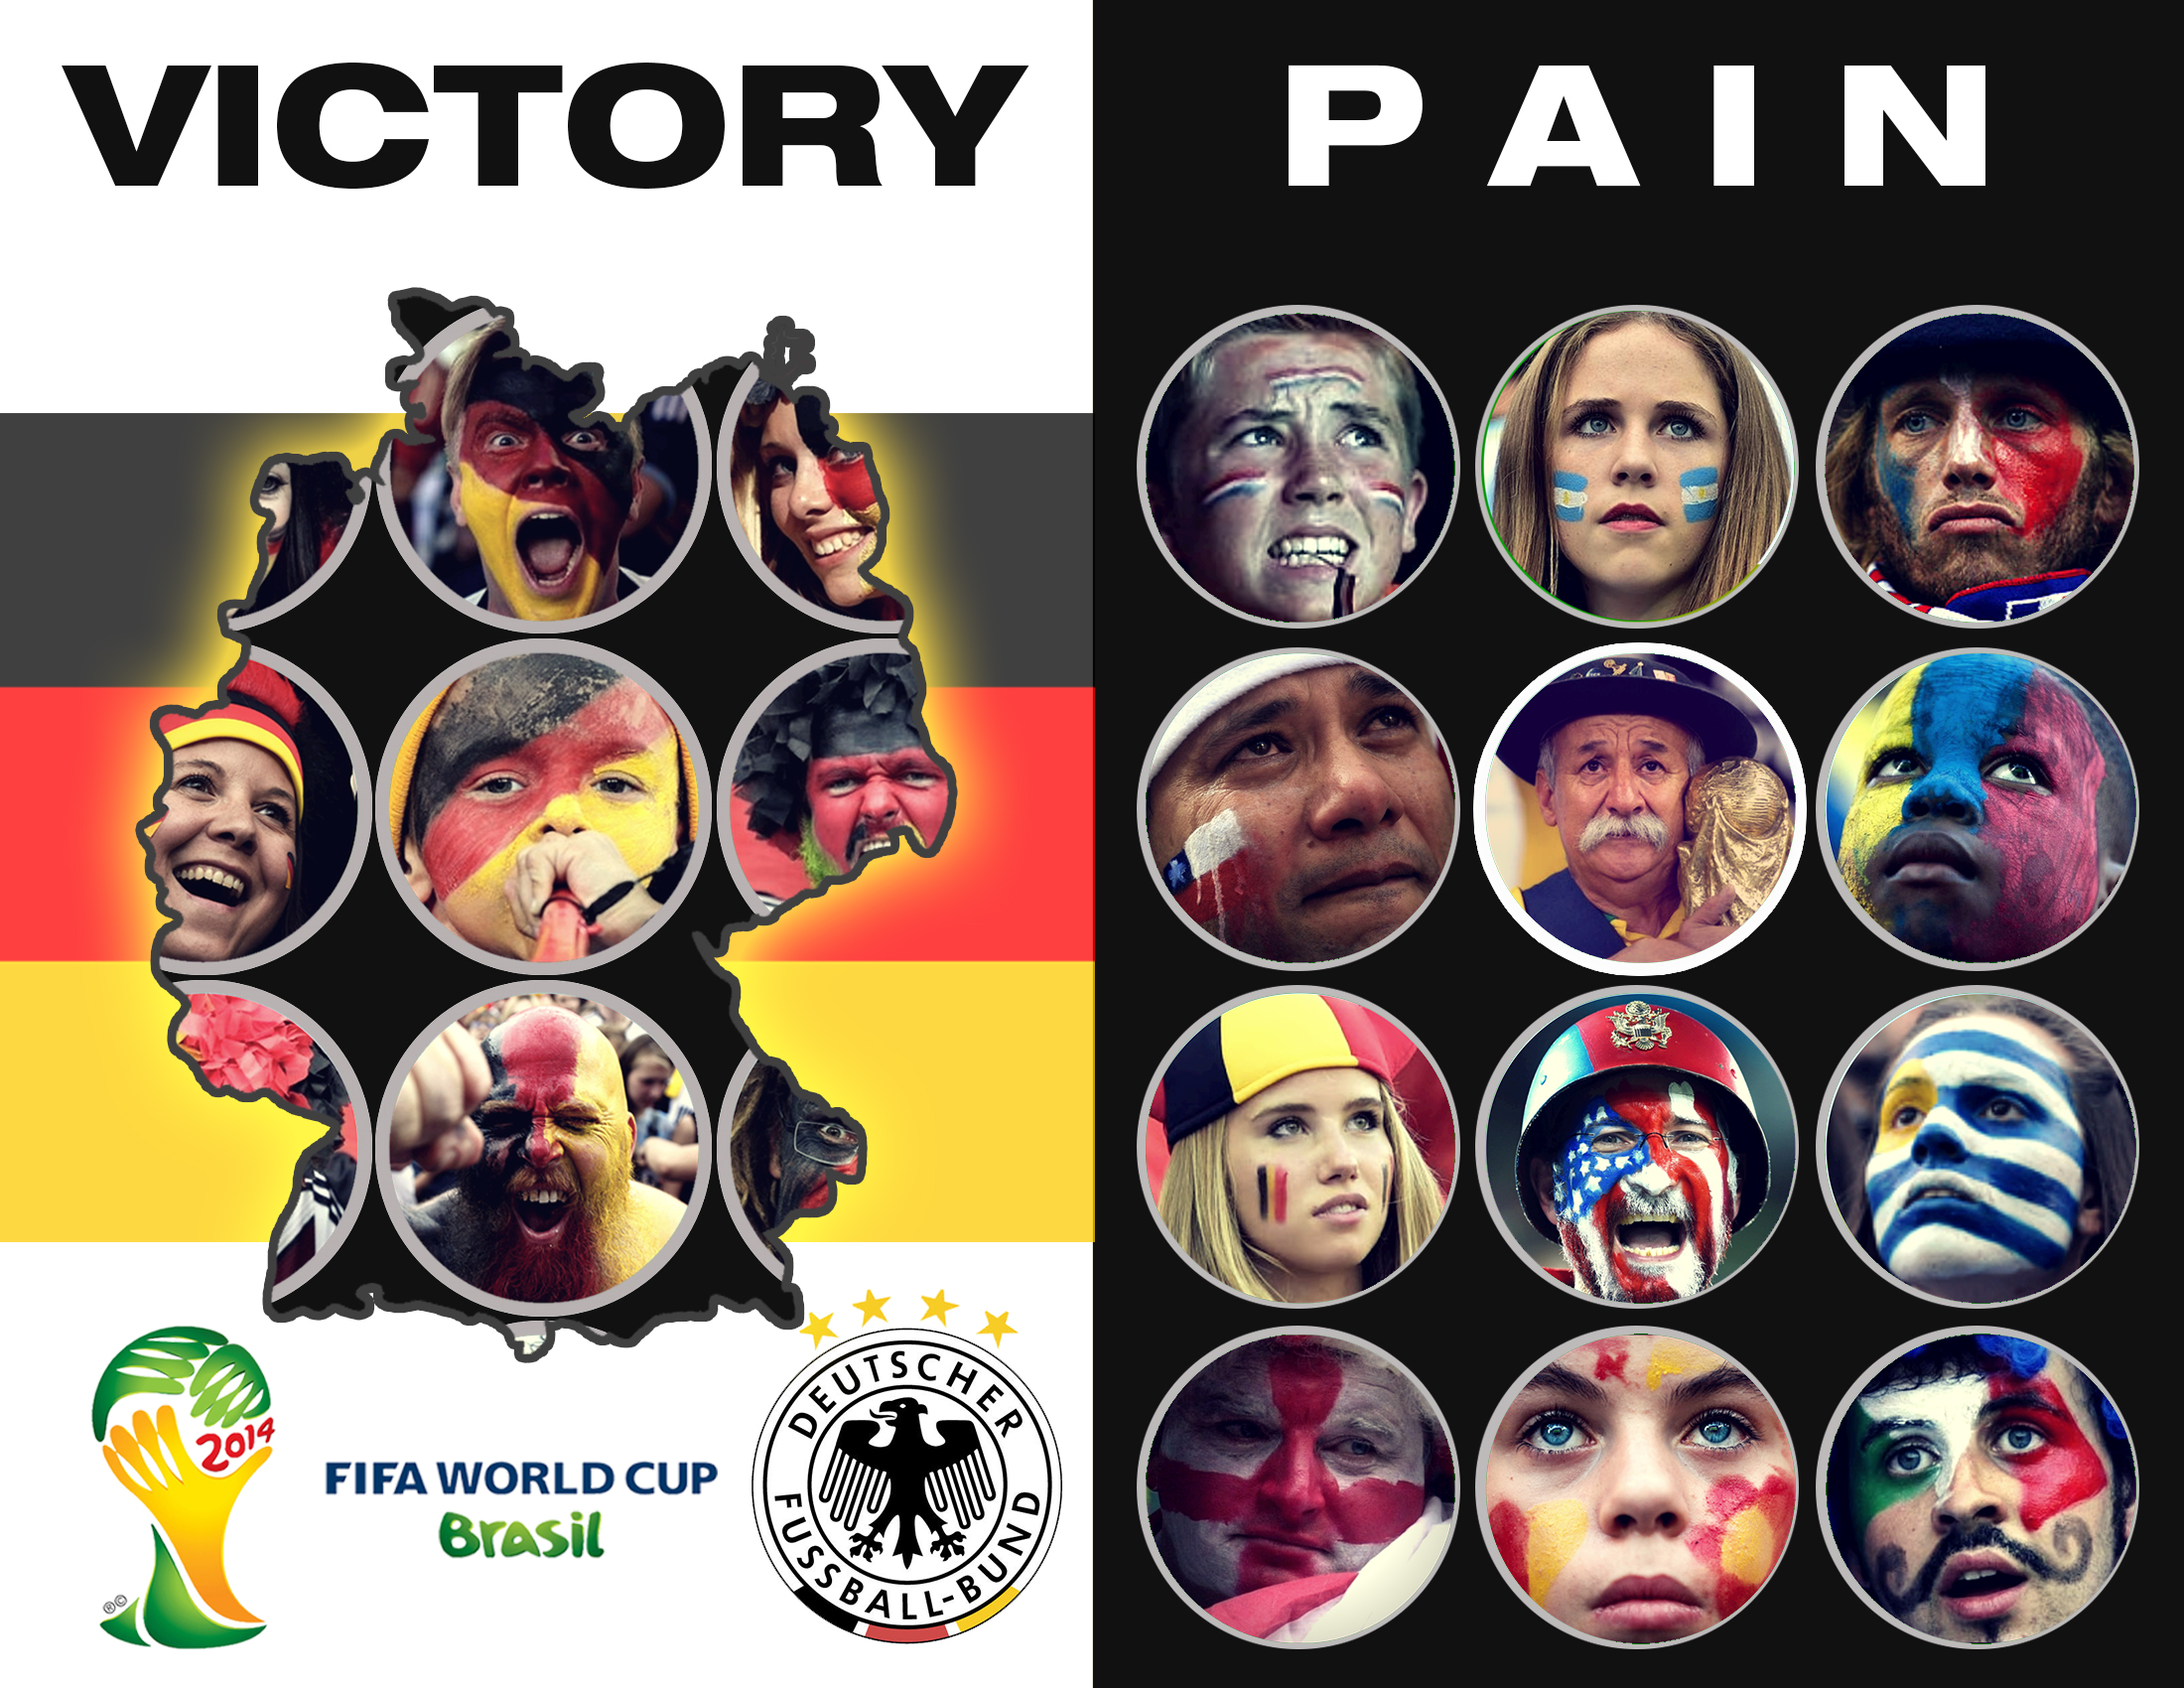 FIFA World Cup 2014 : Victory vs Pain by alabhya on DeviantArt